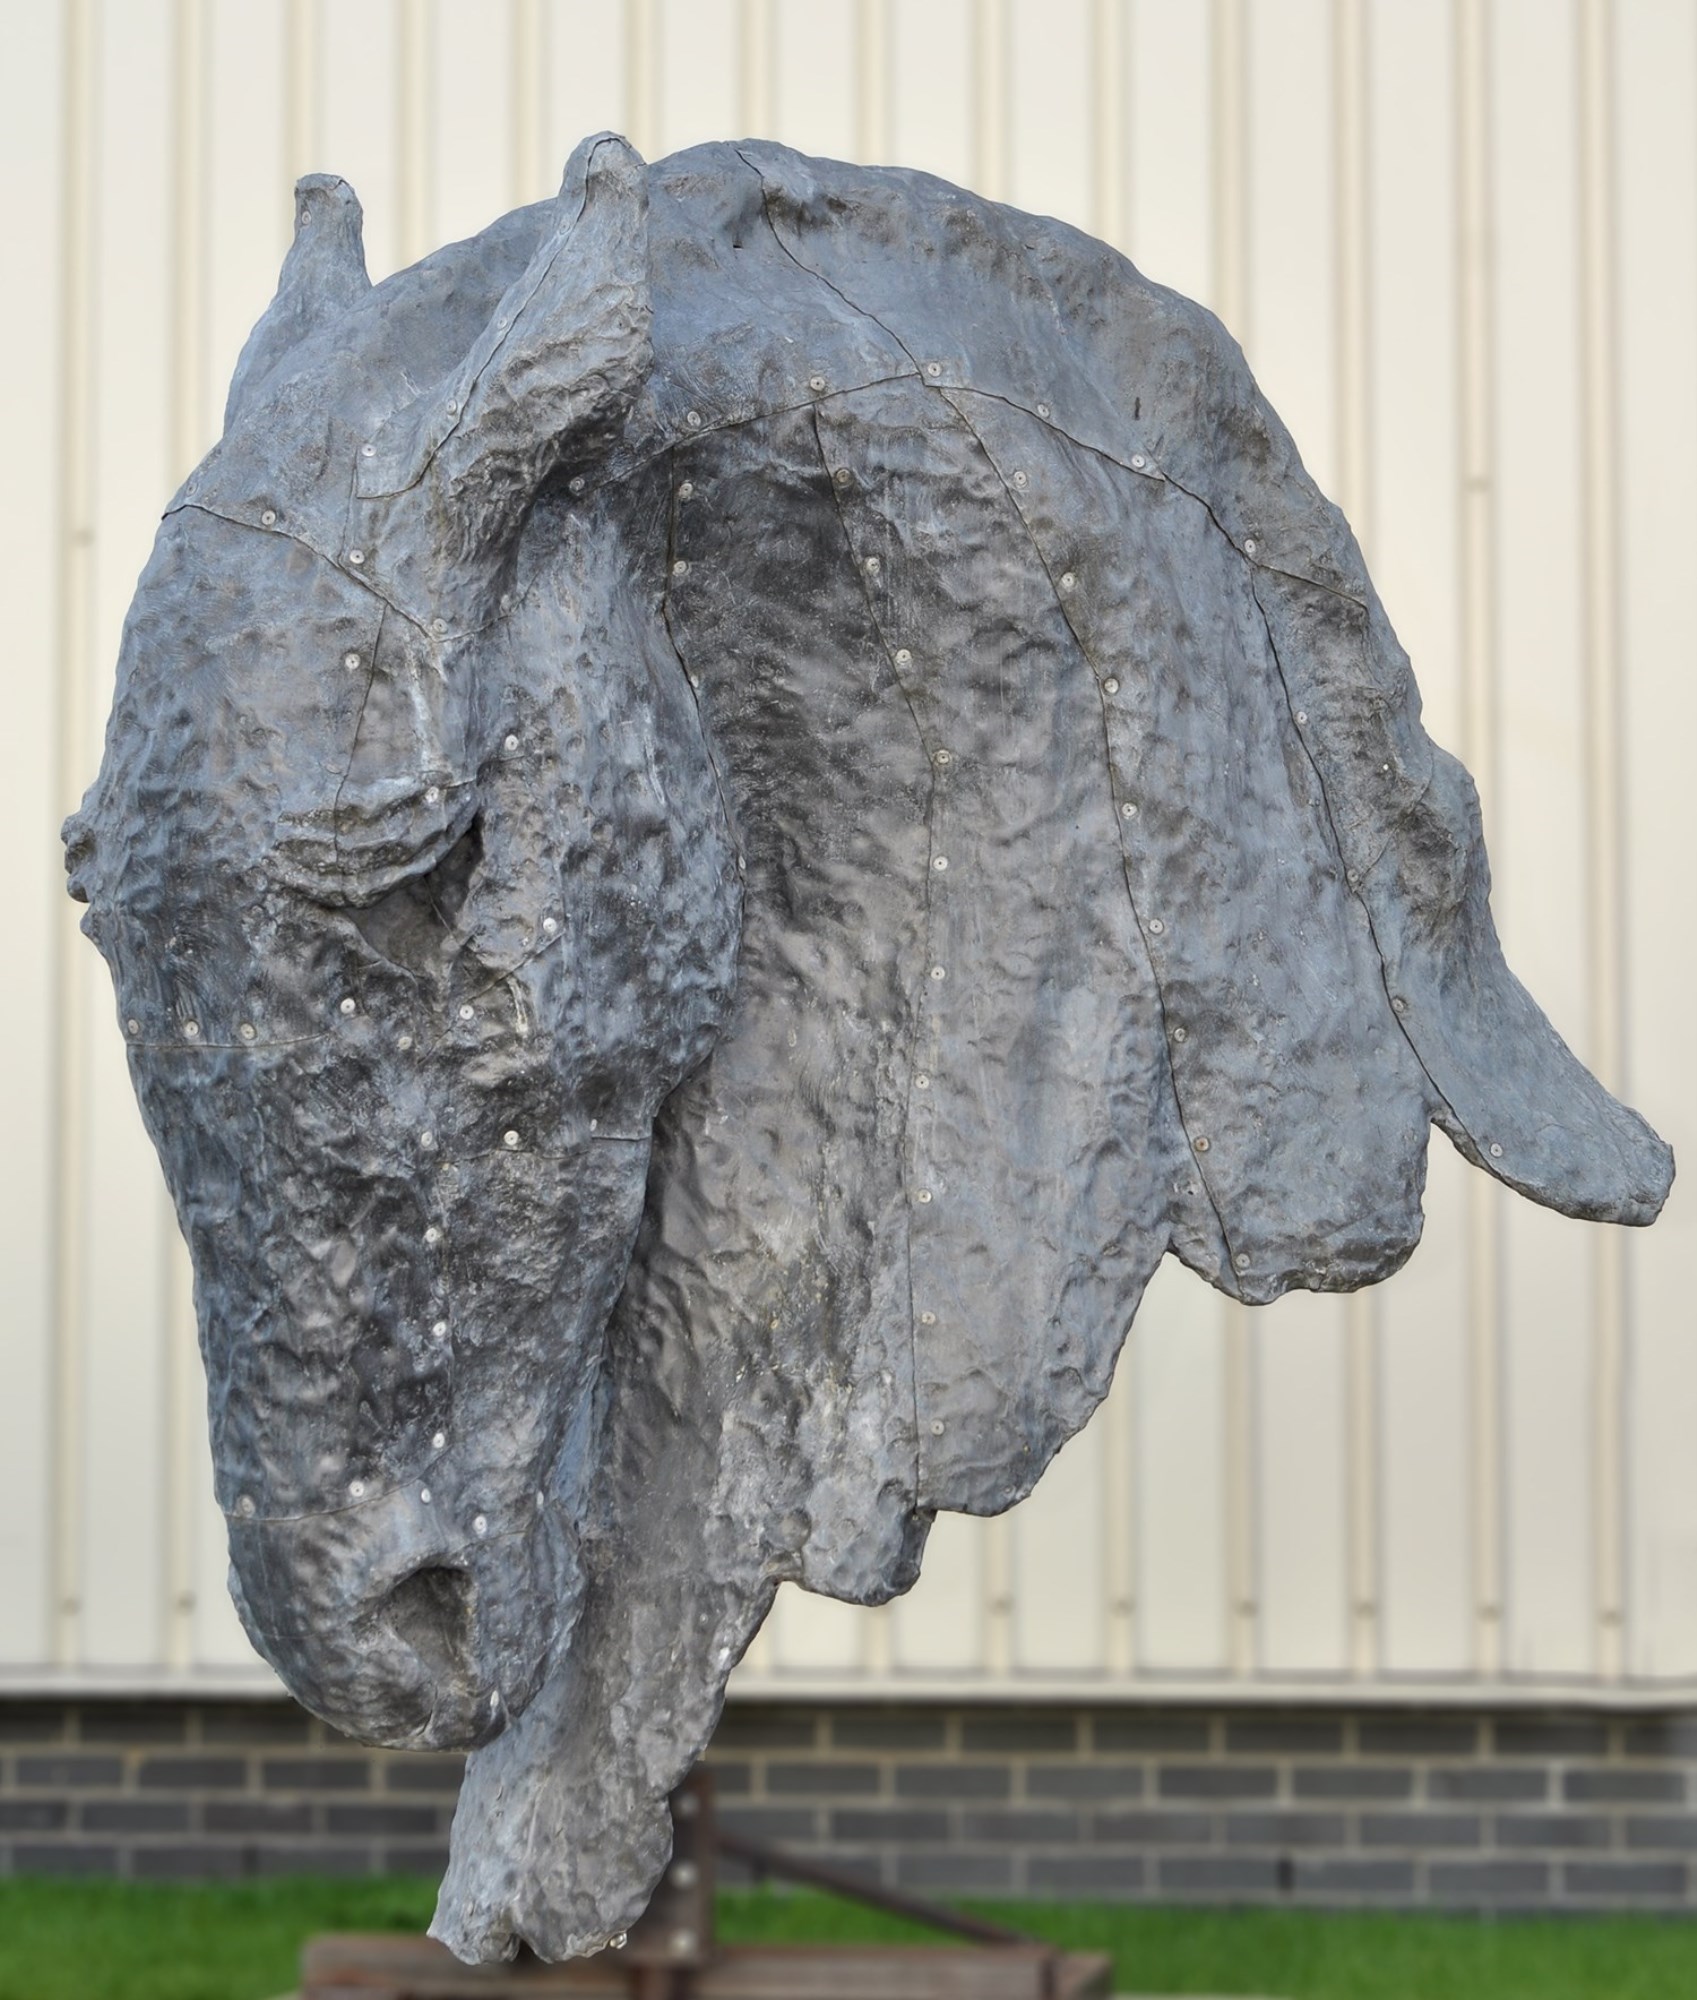 Nic Fiddian-Green ''Into the wind'' - large horse head Lead-covered fibreglass